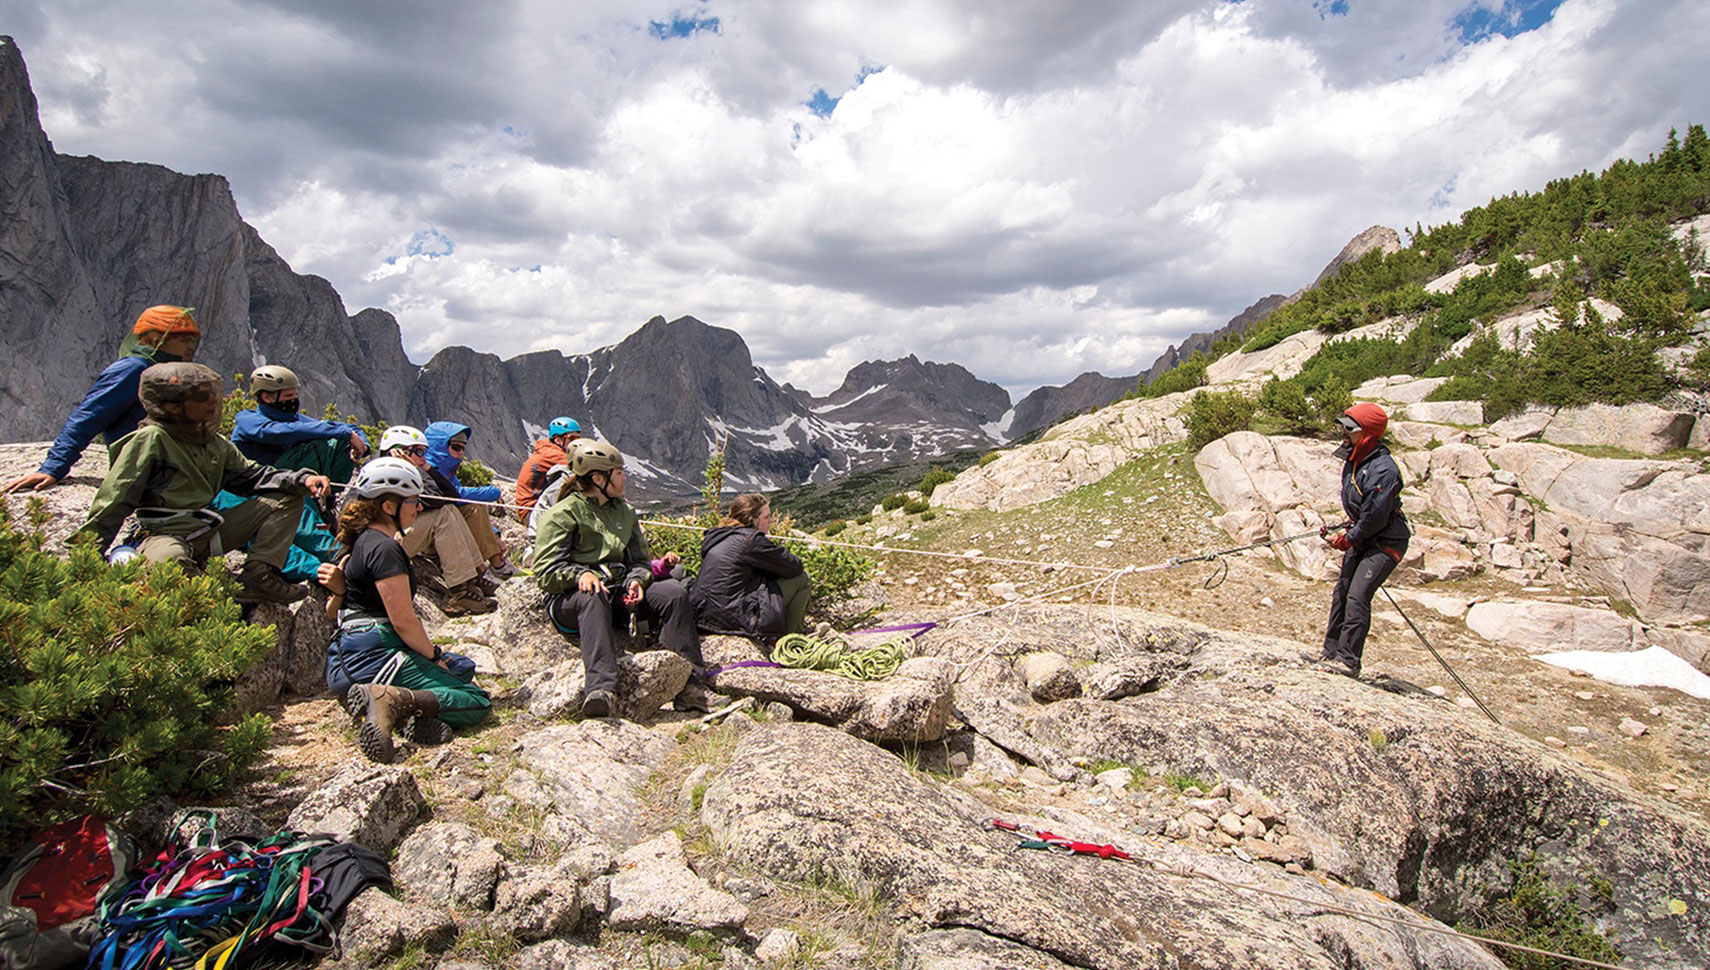 ABOVE IT ALL: A NOLS instructor teaches rappelling during a wilderness expedition in the Rocky Mountains. Photo courtesy of Jared Steinman/NOLS.